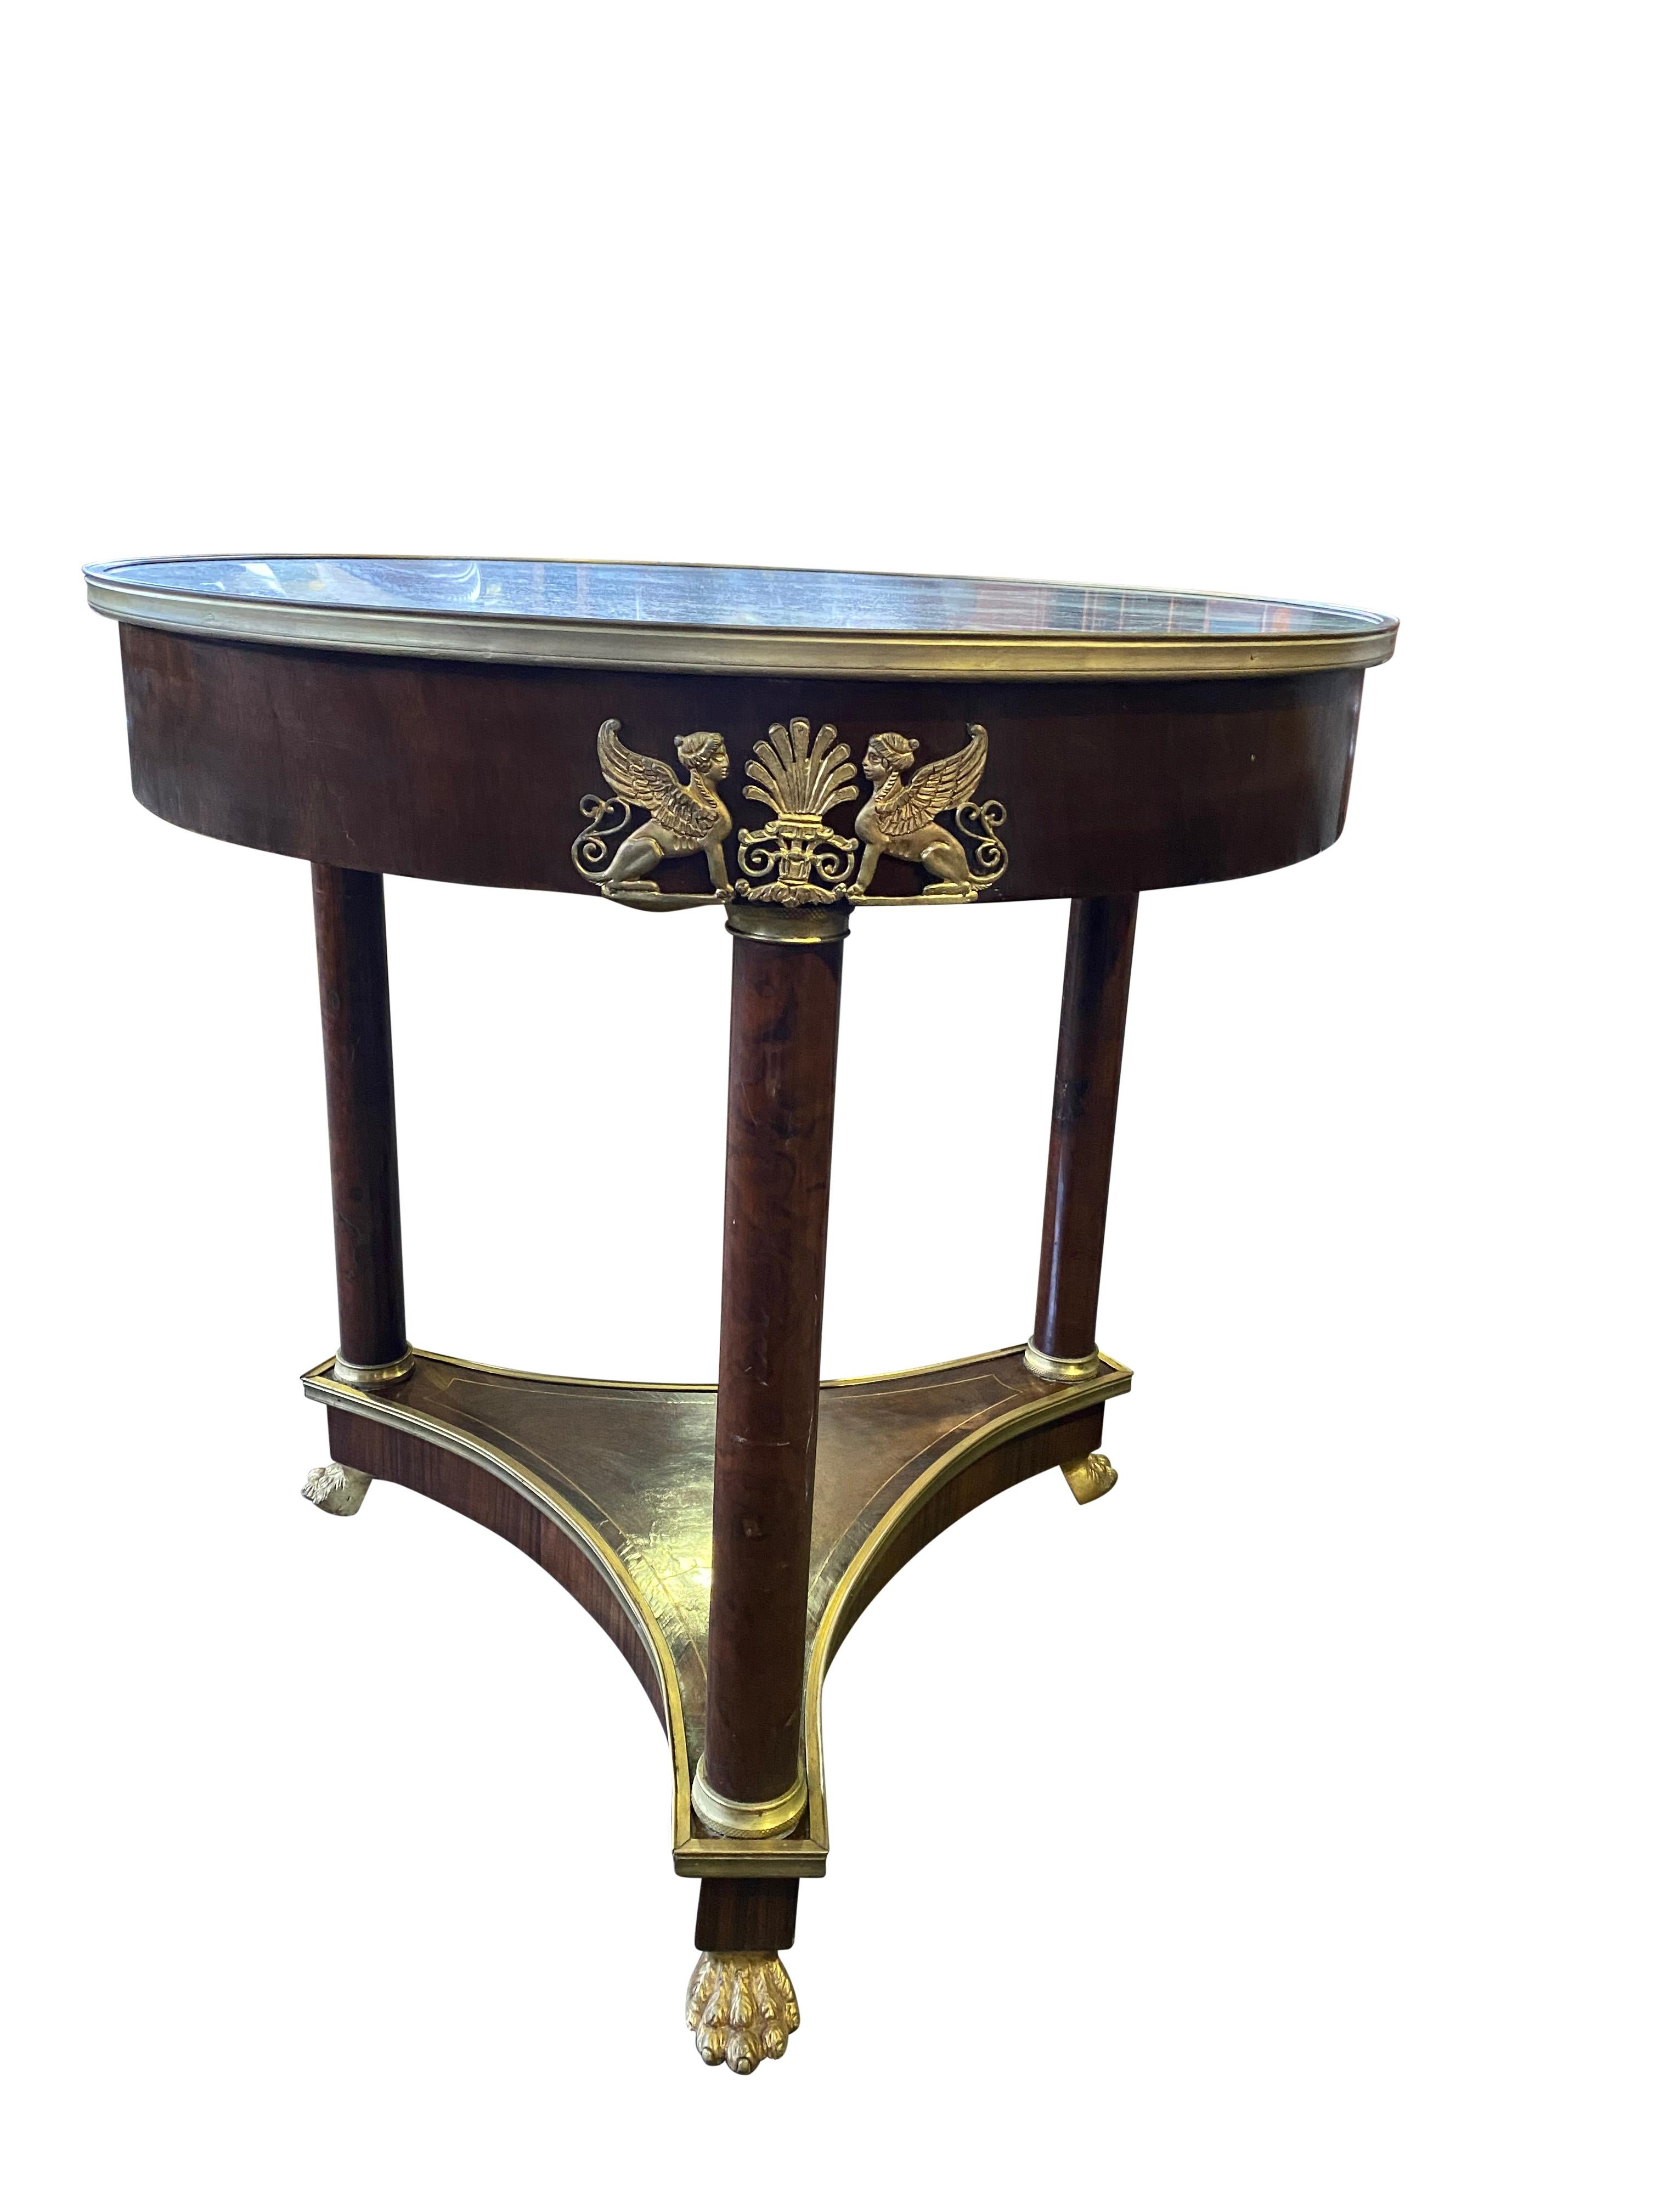 French Empire Round Marble Top Table, 19th Century For Sale 6